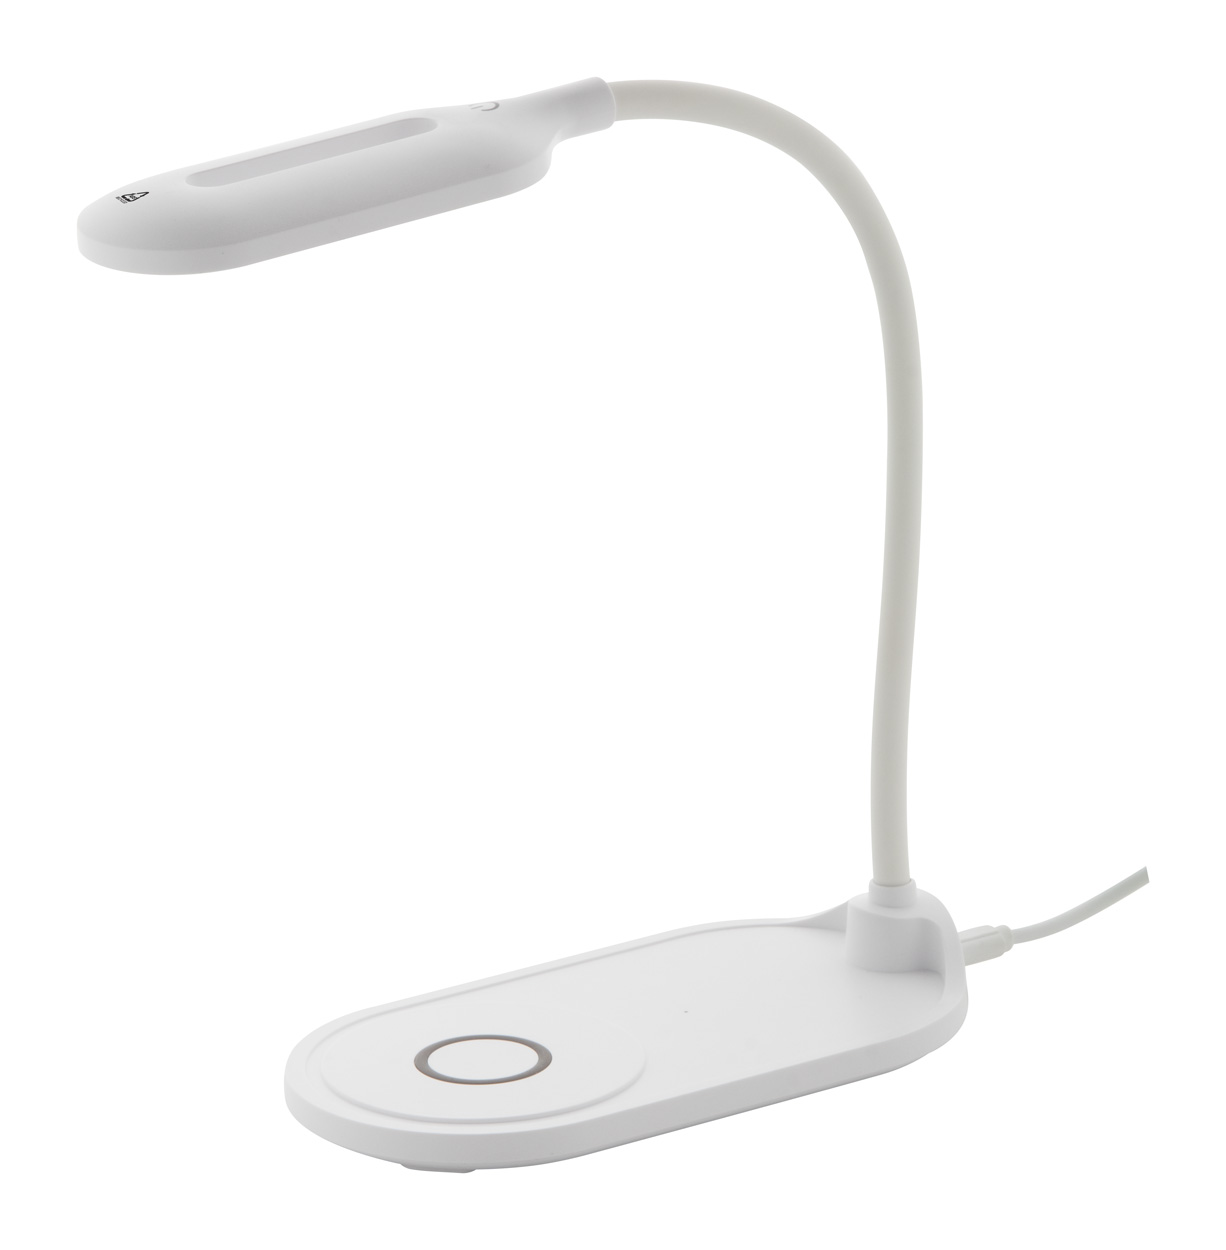 Plastic table multifunction lamp GALAXY made of recycled material - white